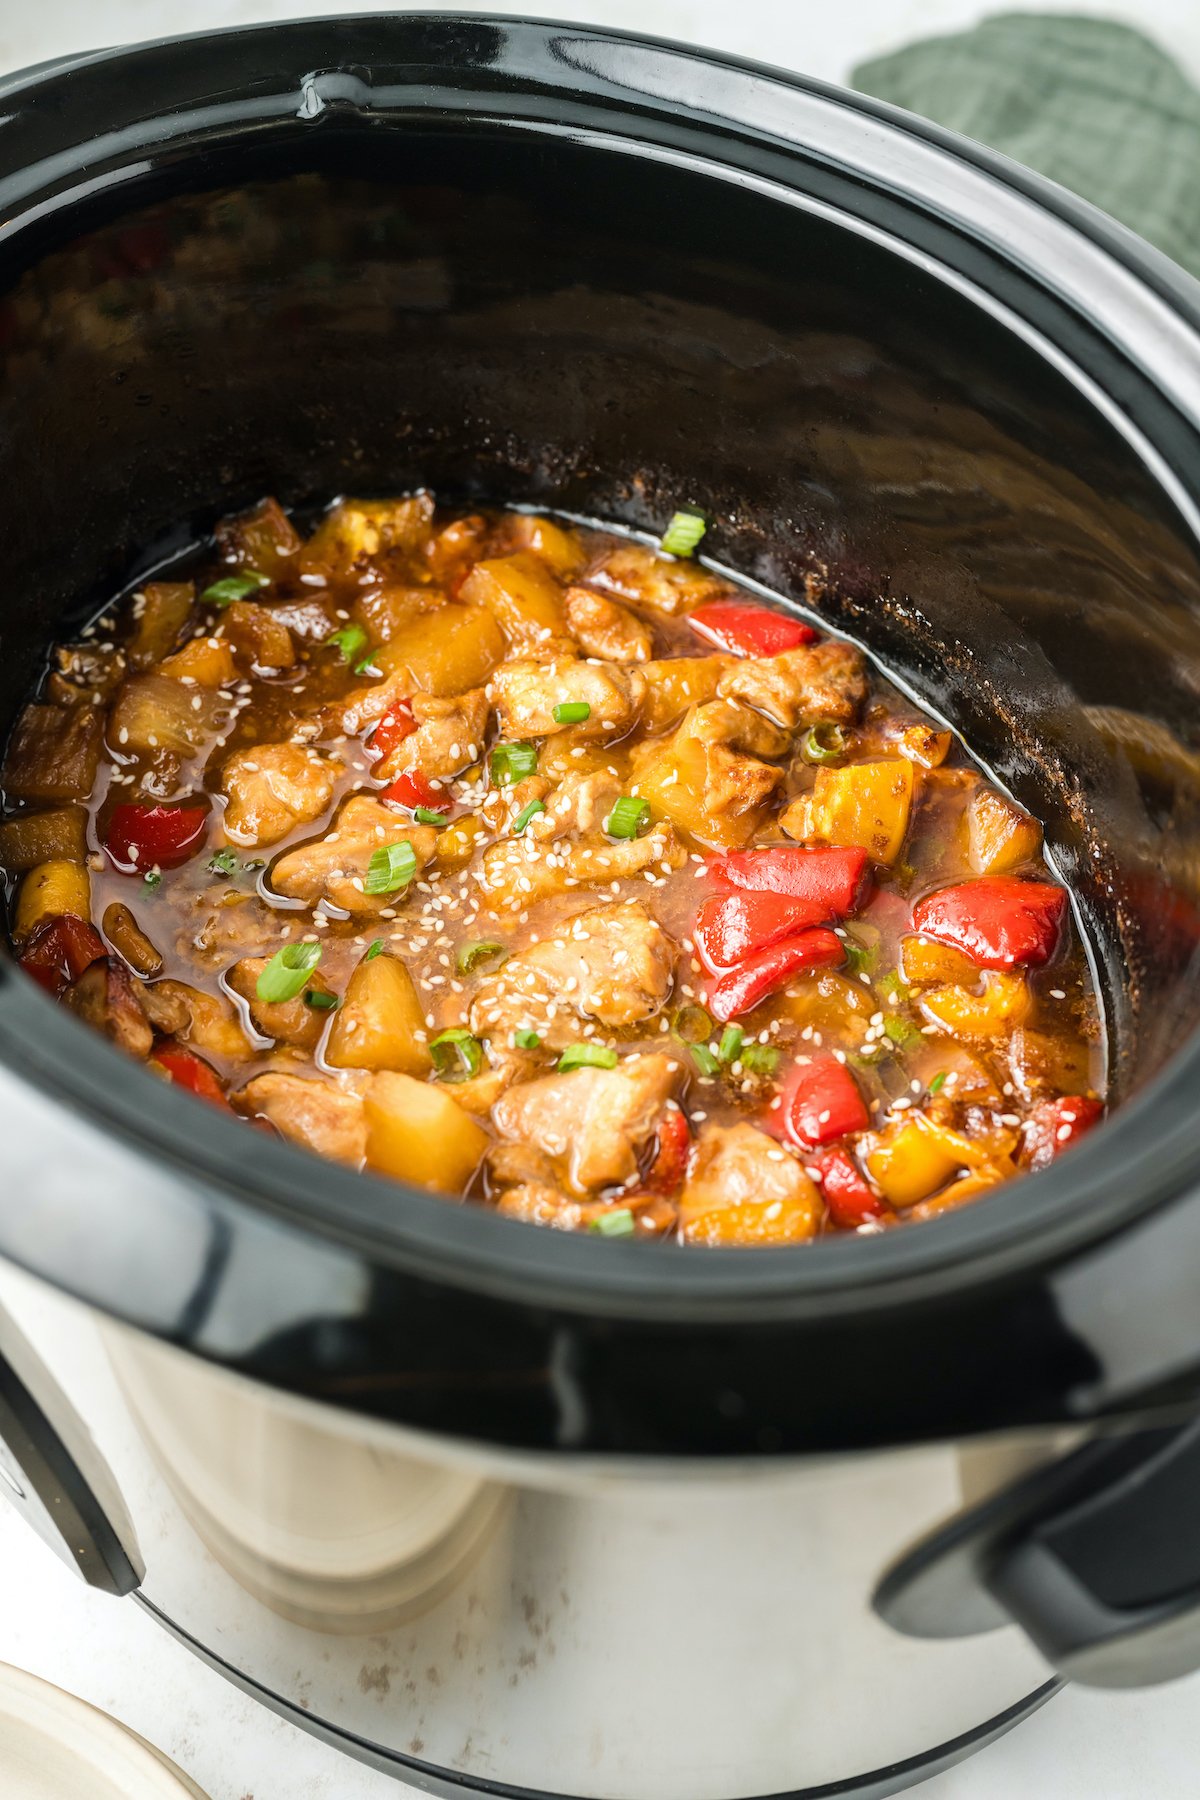 A crock pot is filled with a mixture of cooked chicken thighs, bell peppers, pineapple chunks, and green onions in a thick, sweet brown sauce.